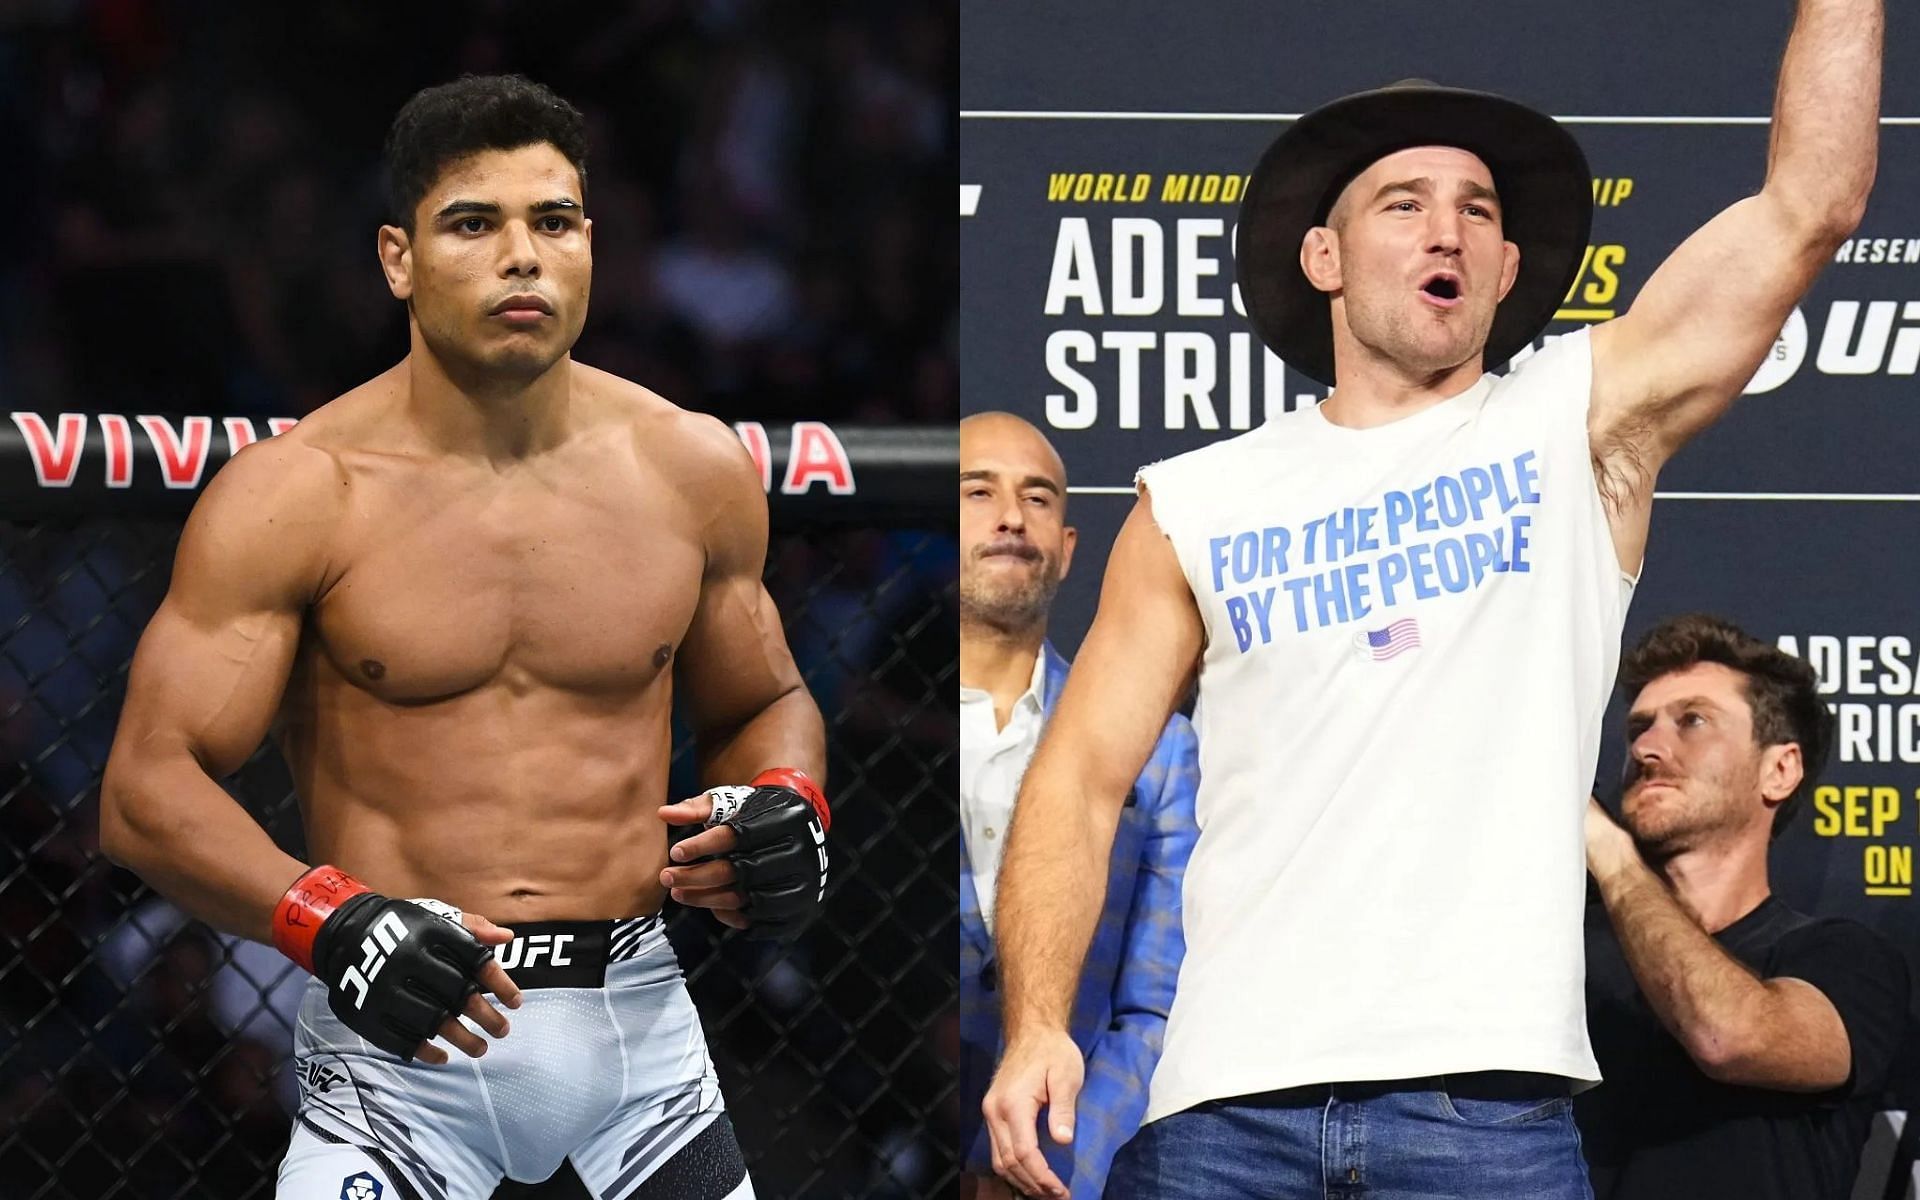 Paulo Costa (left) versus Sean Strickland (right), set for UFC 302, predicted by former sparring partner of both middleweights [Images Courtesy: @GettyImages, @sstricklandmma on X]